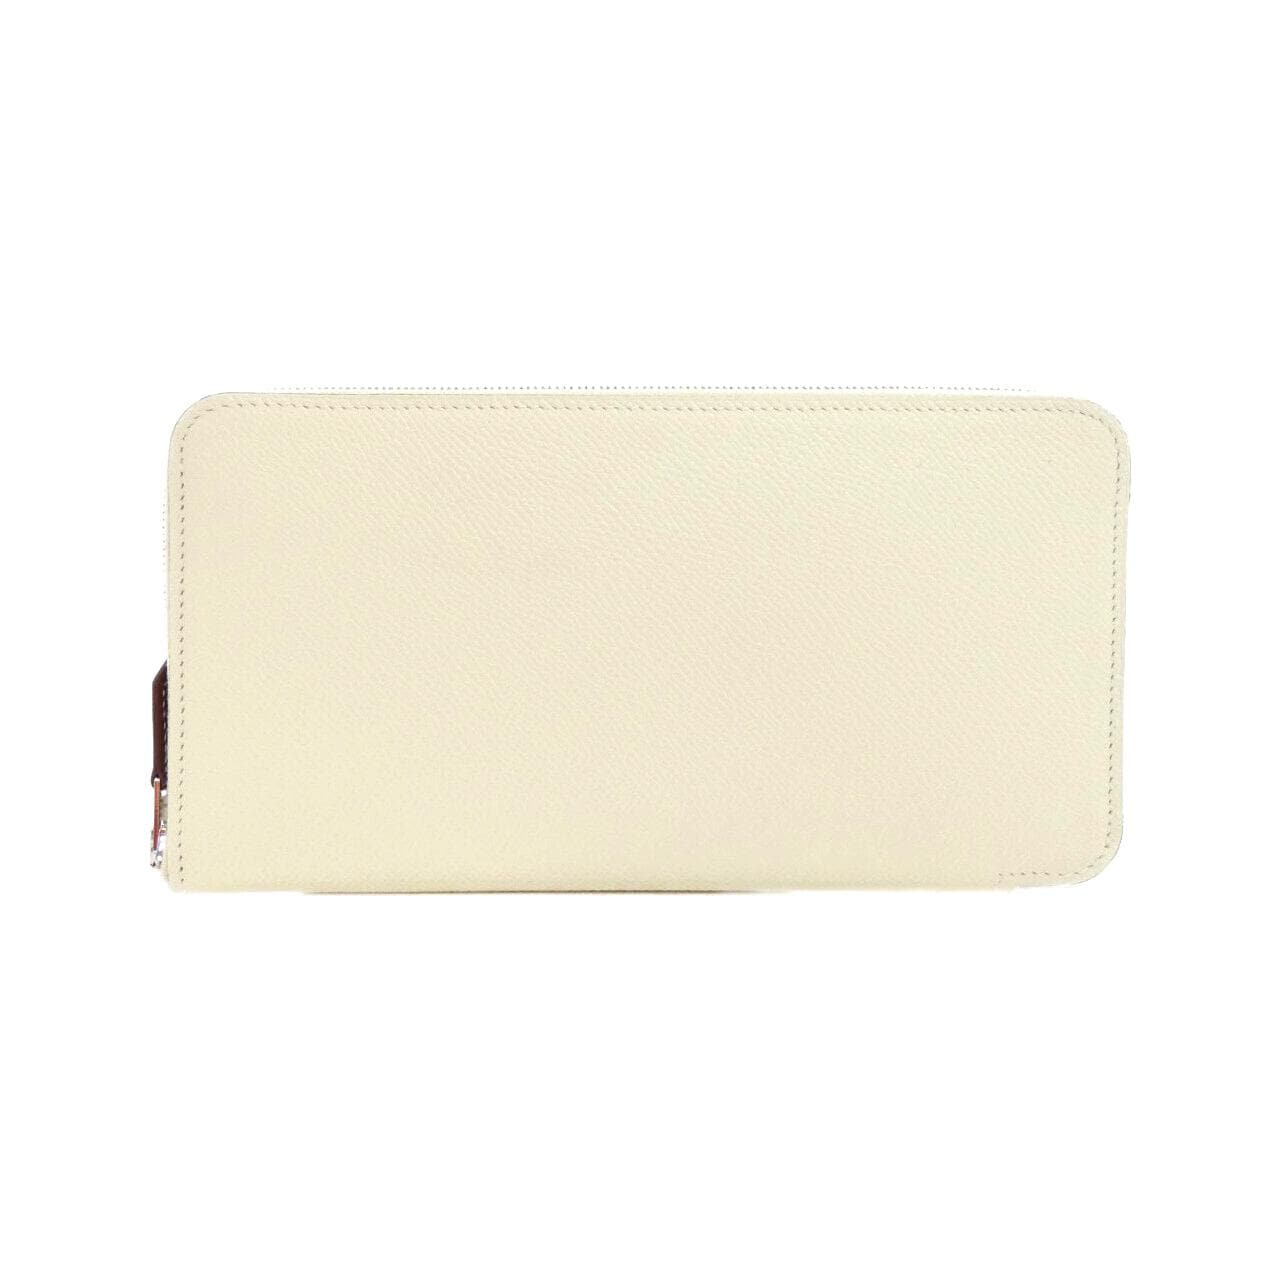 [Unused items] HERMES LUCKY DAISY Silk in Classic 083822CK Wallet